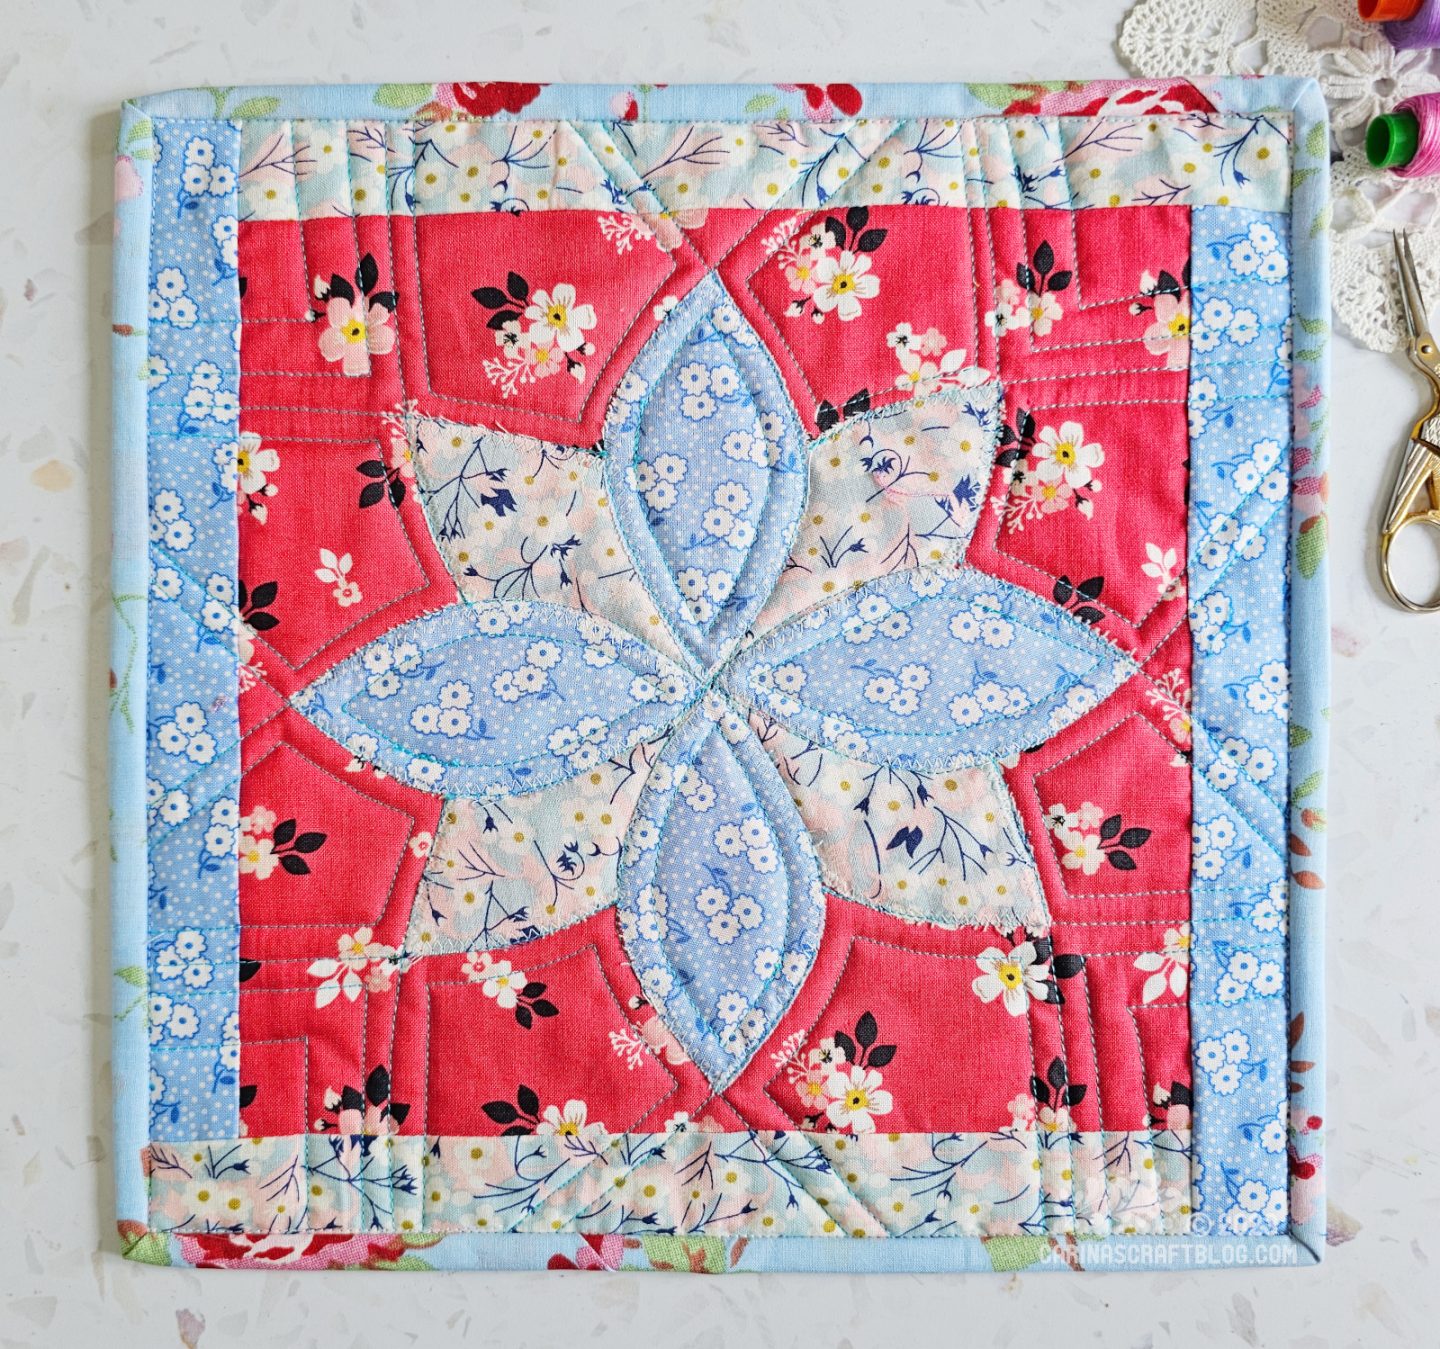 View from above of a mini quilt. The background is red fabric with white and black flowers. On that is appliquéd a sort of flower shape in light blue colours. There is a border in the same light blue fabrics.